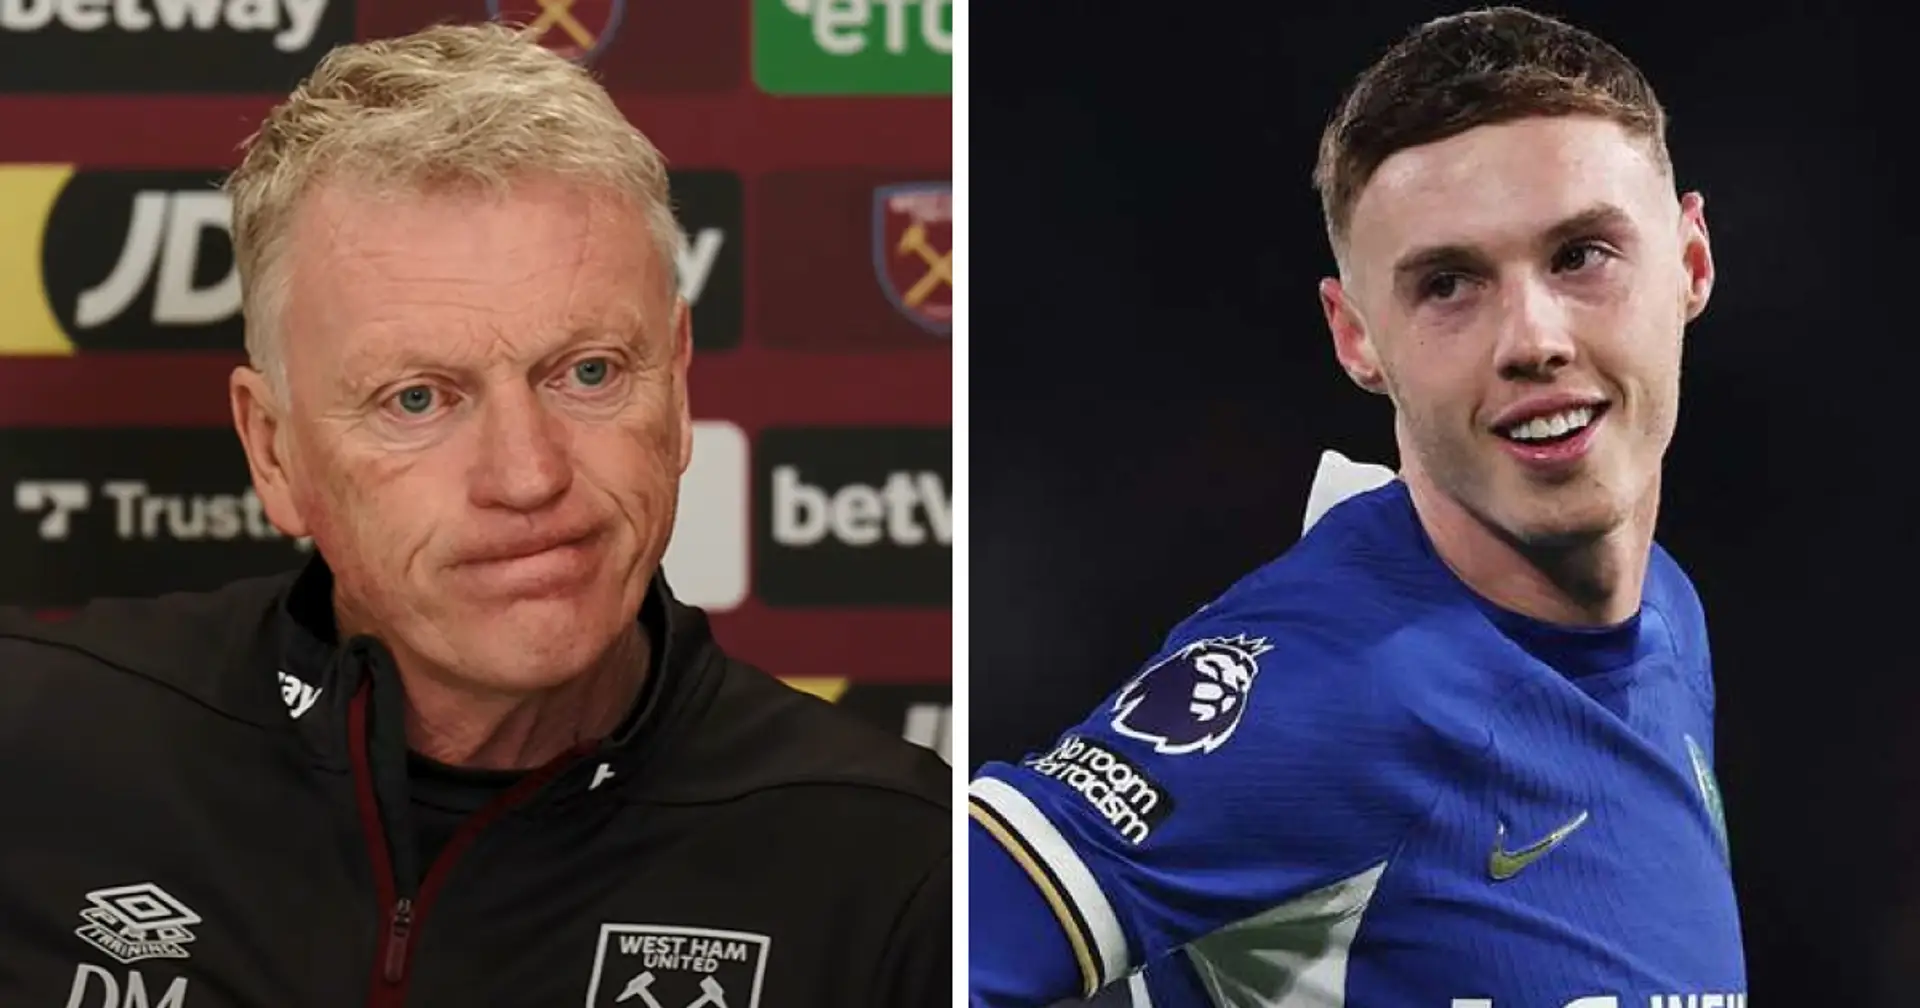 'You can probably imagine': David Moyes reveals West Ham were 'close' to signing Cole Palmer ahead of Chelsea clash